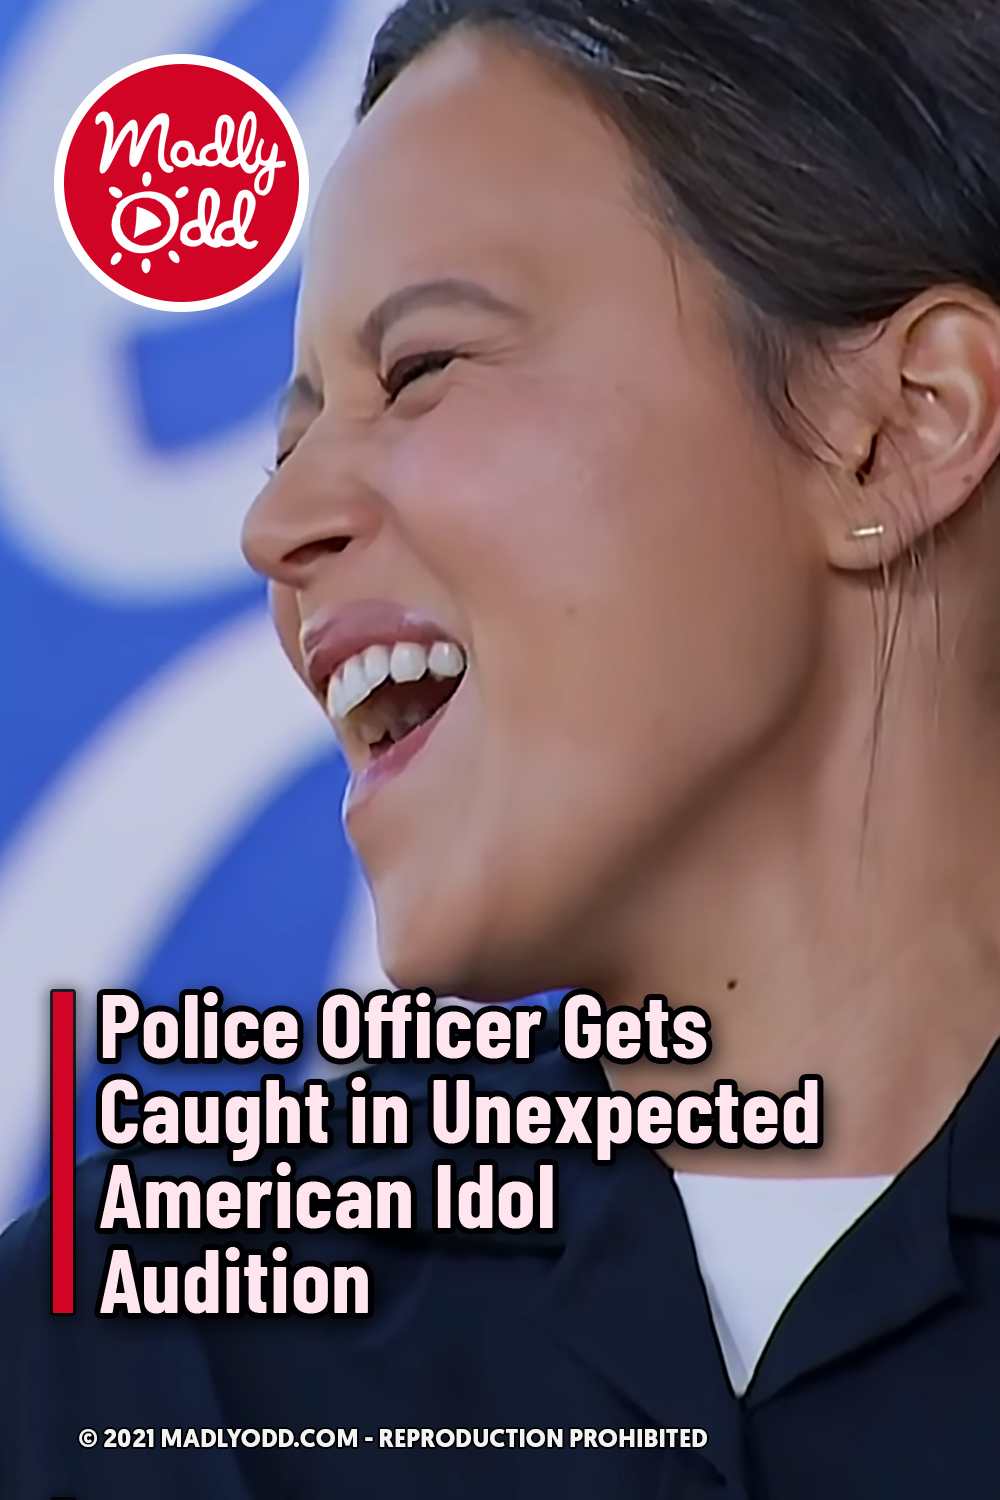 Police Officer Gets Caught in Unexpected American Idol Audition